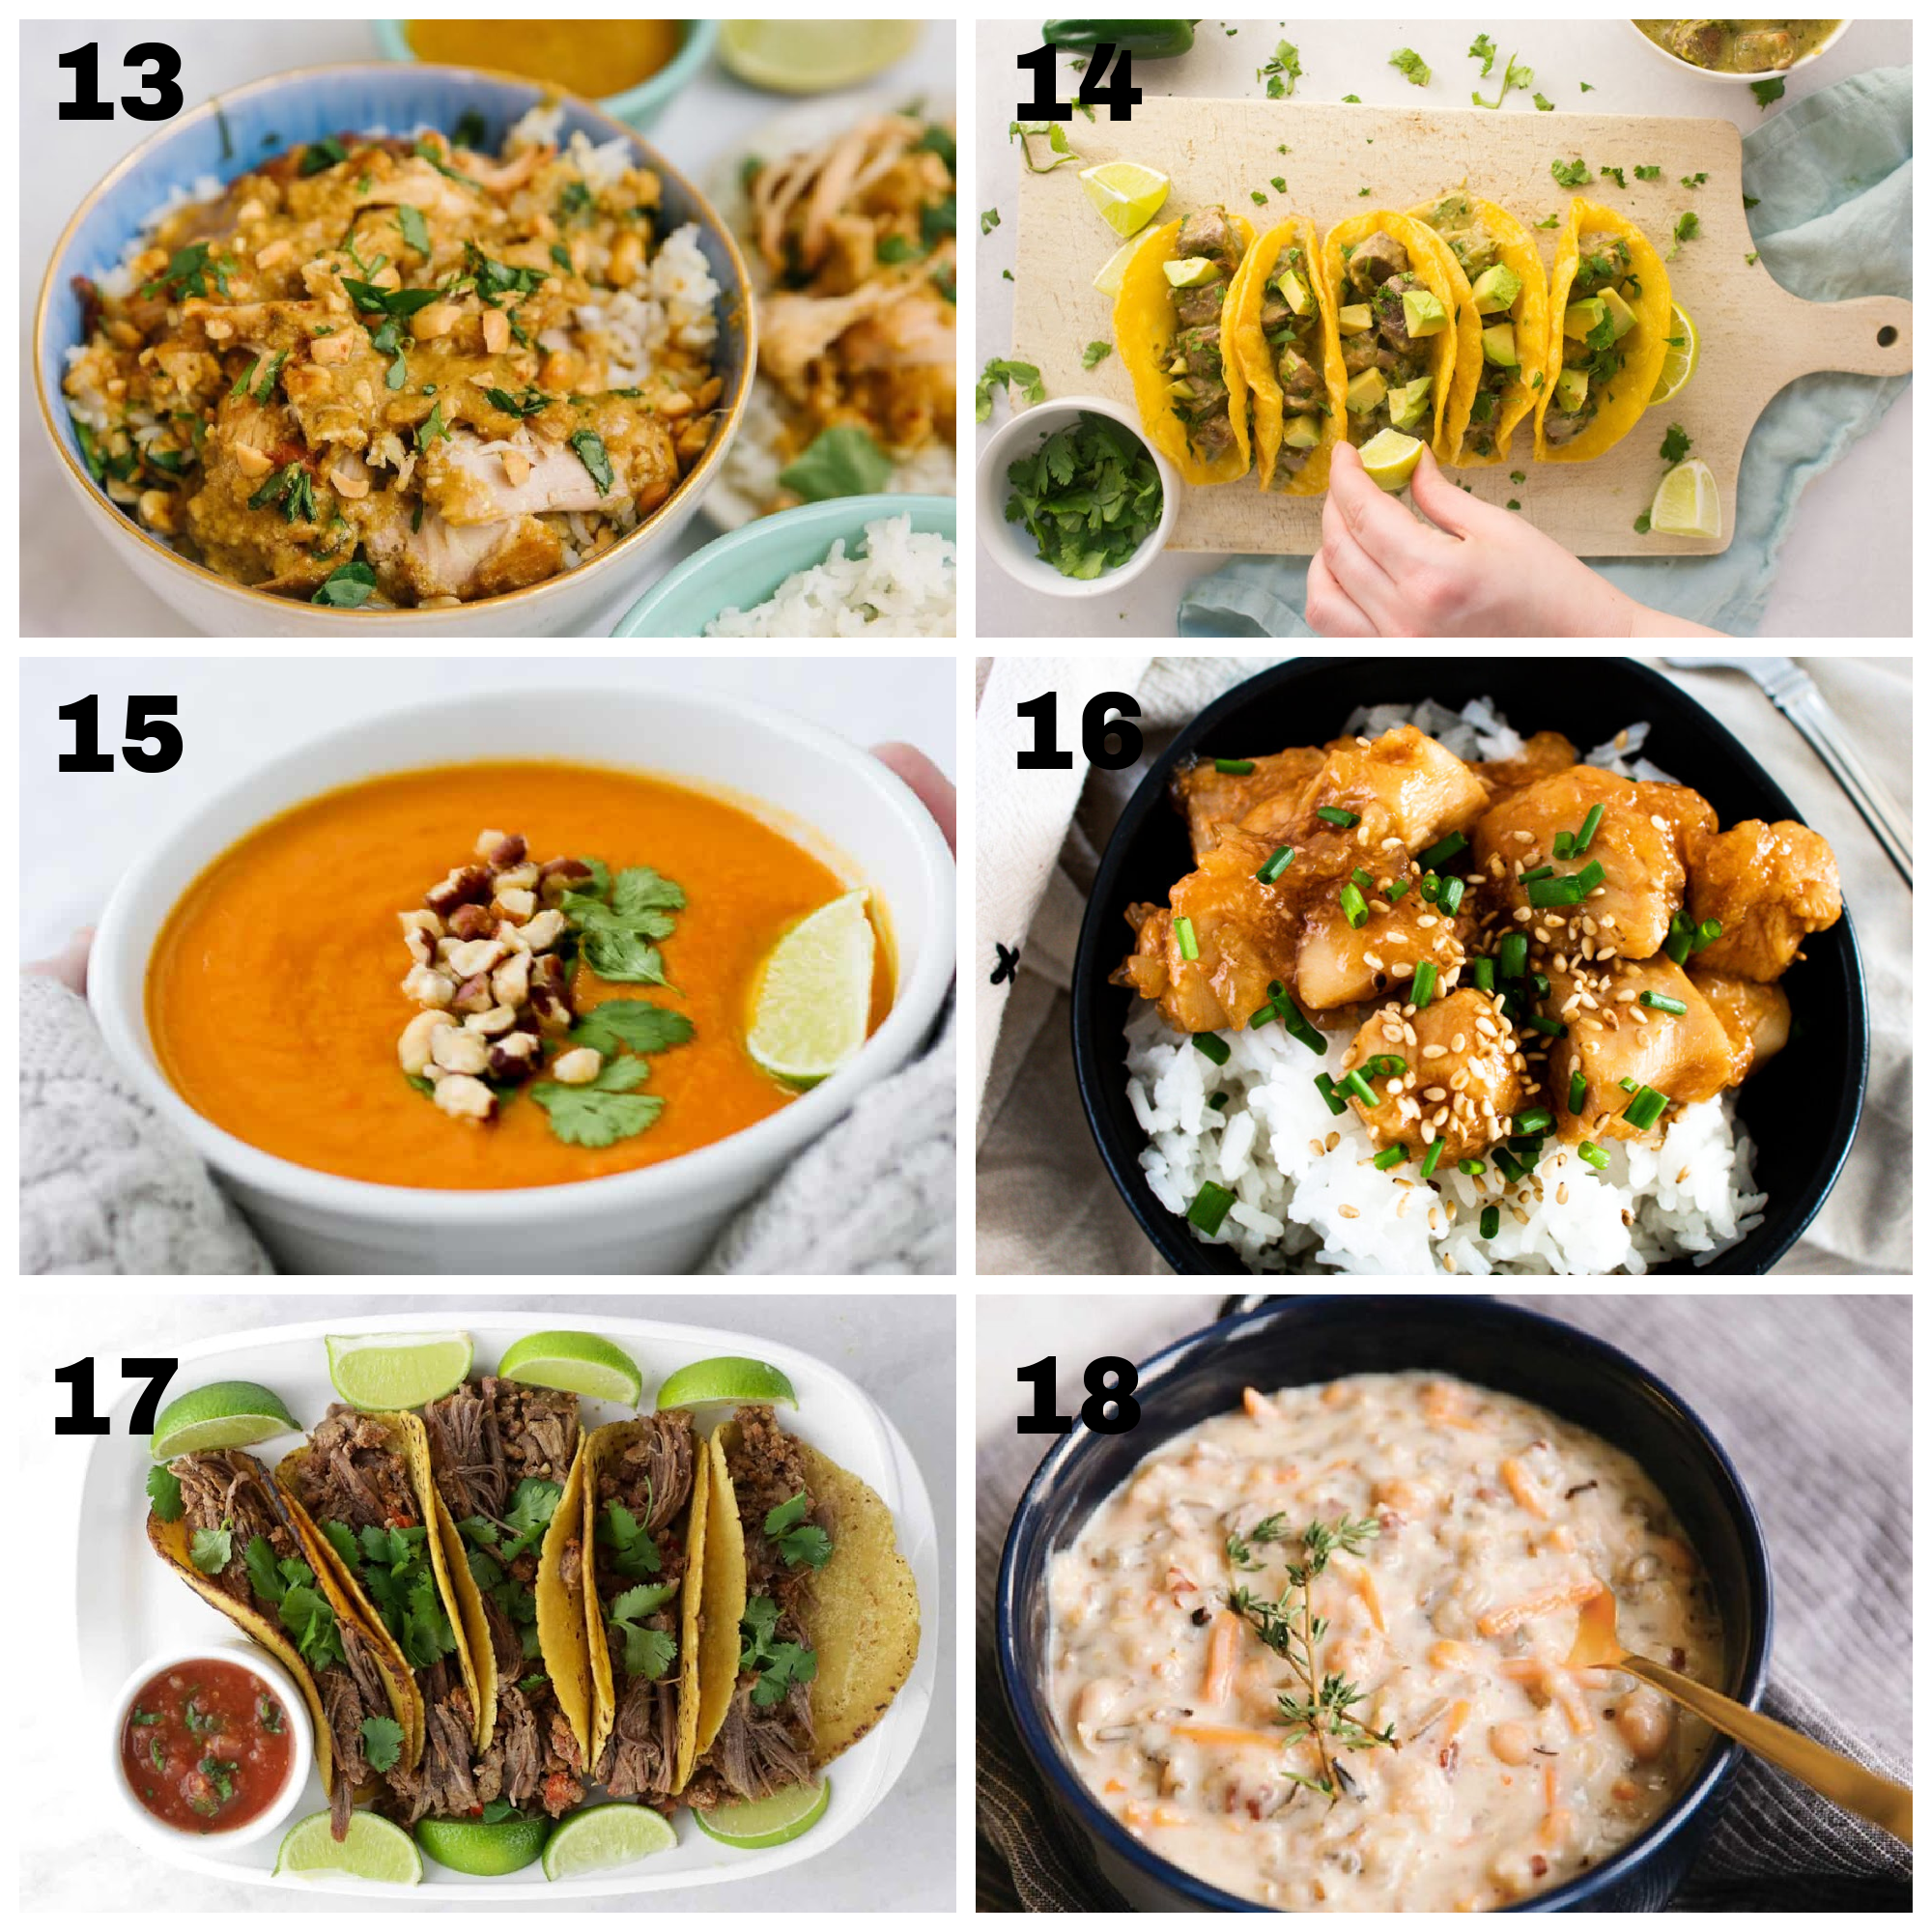 6 completed dinner ideas for instant pot make ahead meals labeled 13-18